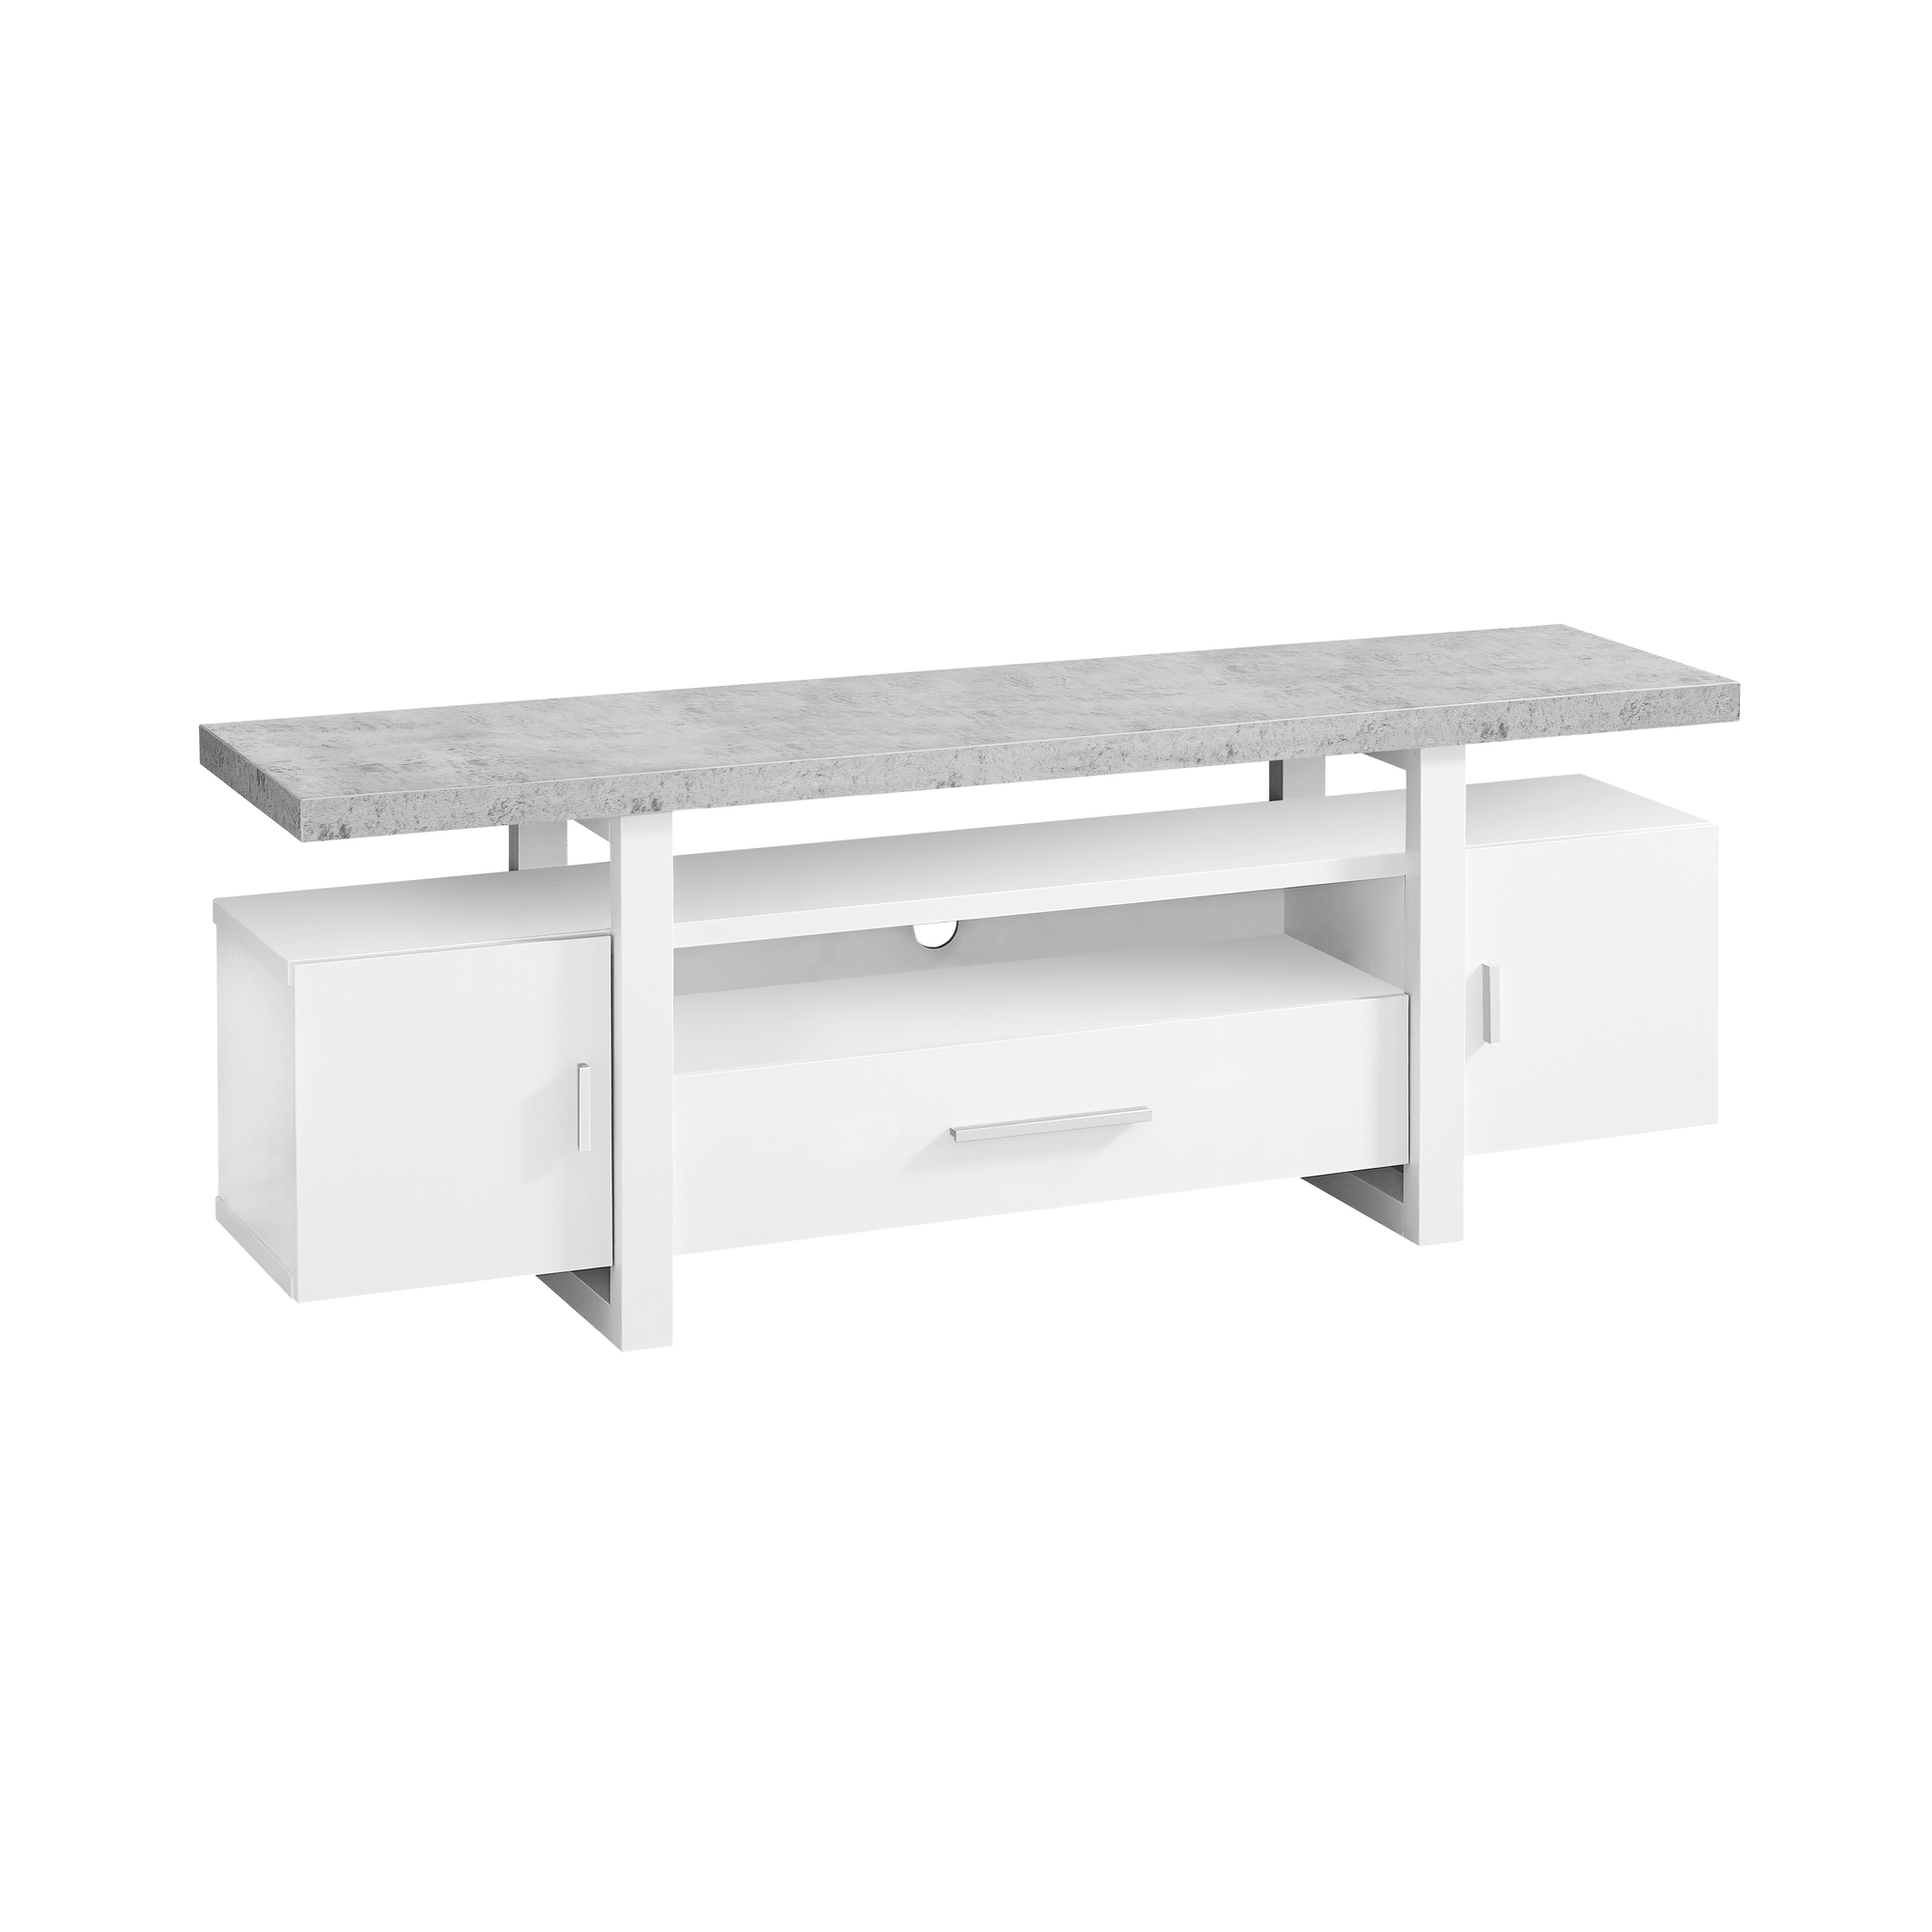 15.5" x 60" x 22" White Grey Particle Board Hollow Core TV Stand With A Cement Look Top